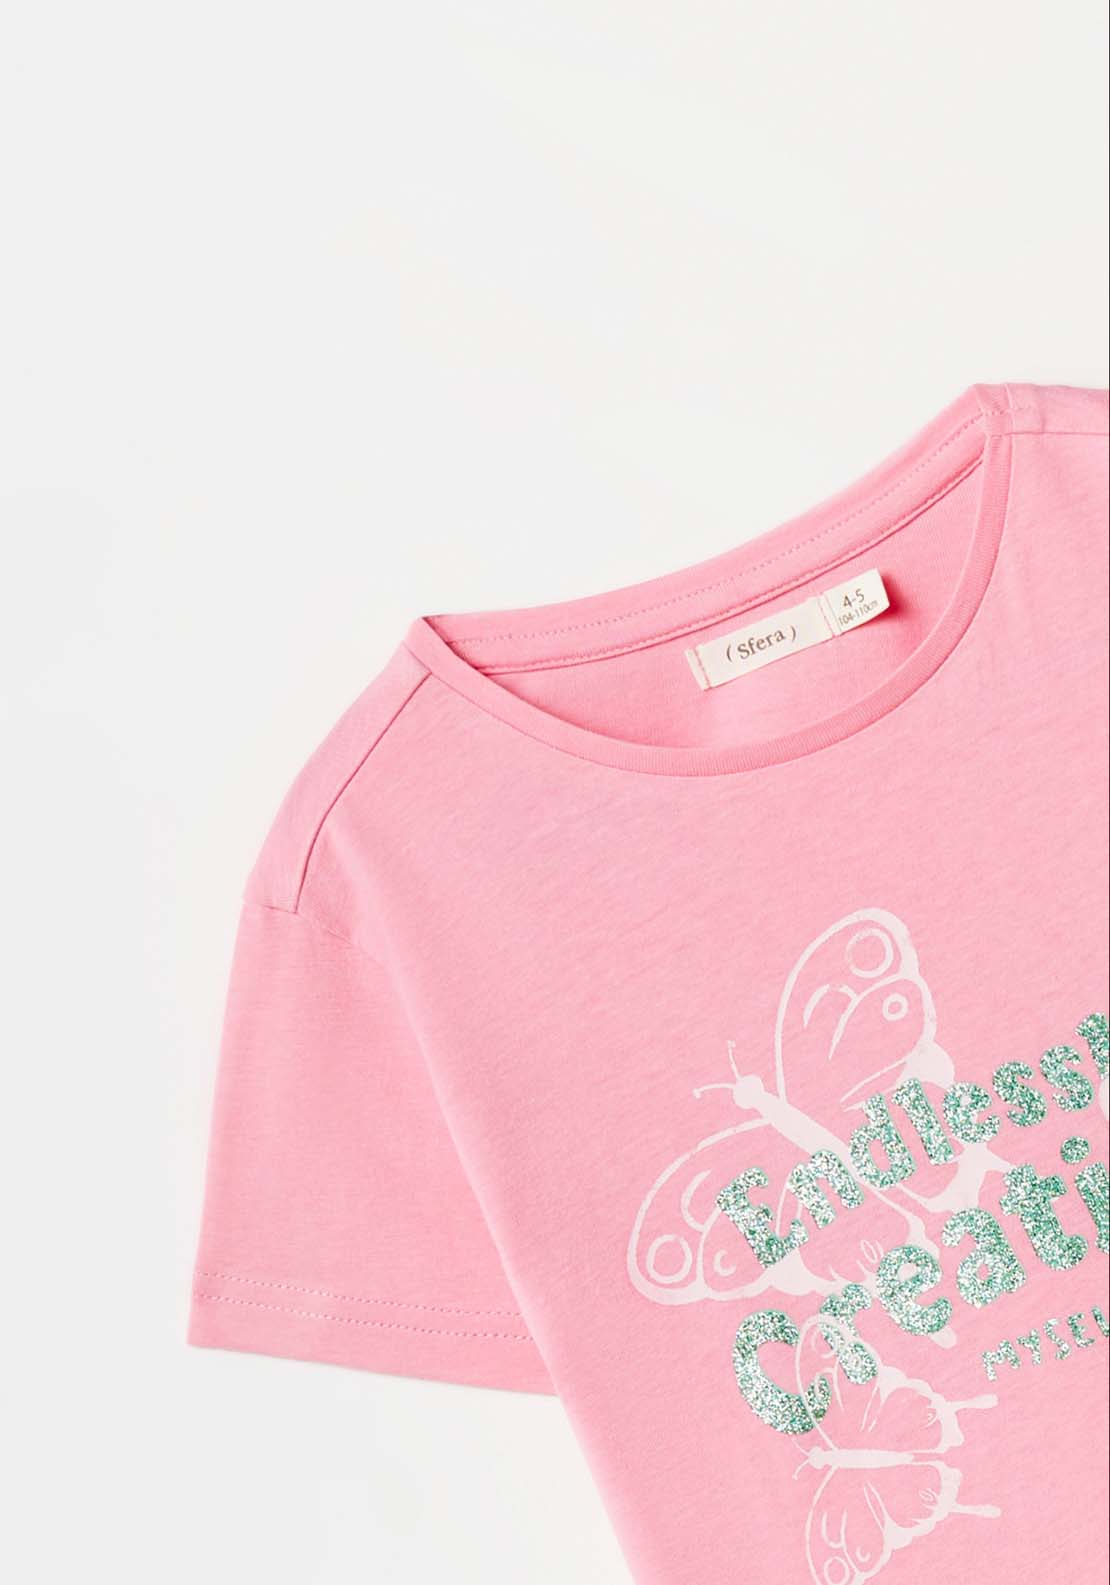 Sfera Butterfly T-Shirt - Pink 2 Shaws Department Stores